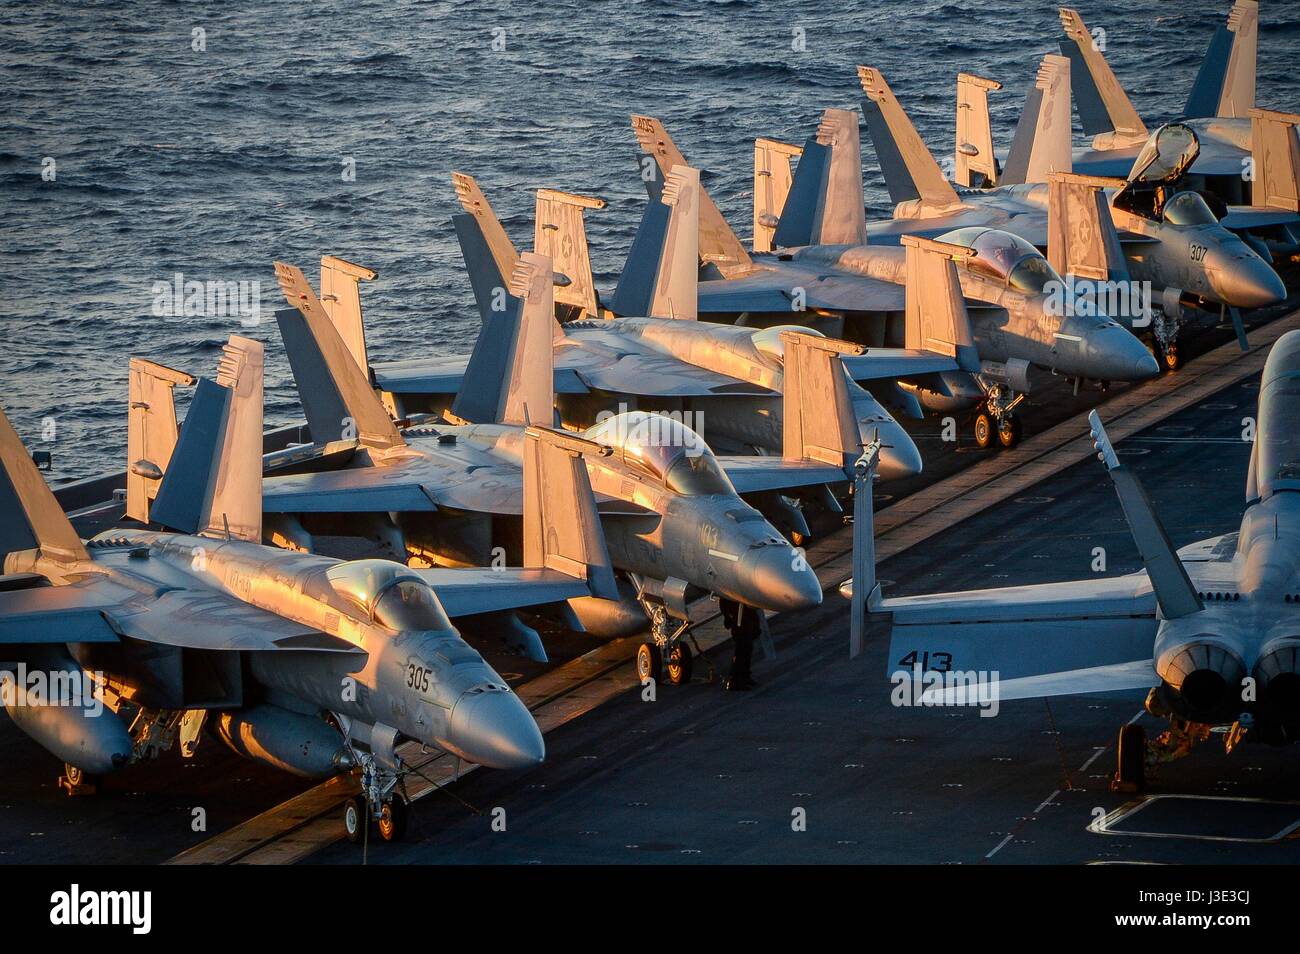 U.S. Navy F-18 Fighter Aircraft line up on the flight deck of the USN Nimitz-class aircraft carrier USS Theodore Roosevelt April 9, 2017 in the Pacific Ocean.    (photo by MCS3 Alexander Perlman/US Navy  via Planetpix) Stock Photo